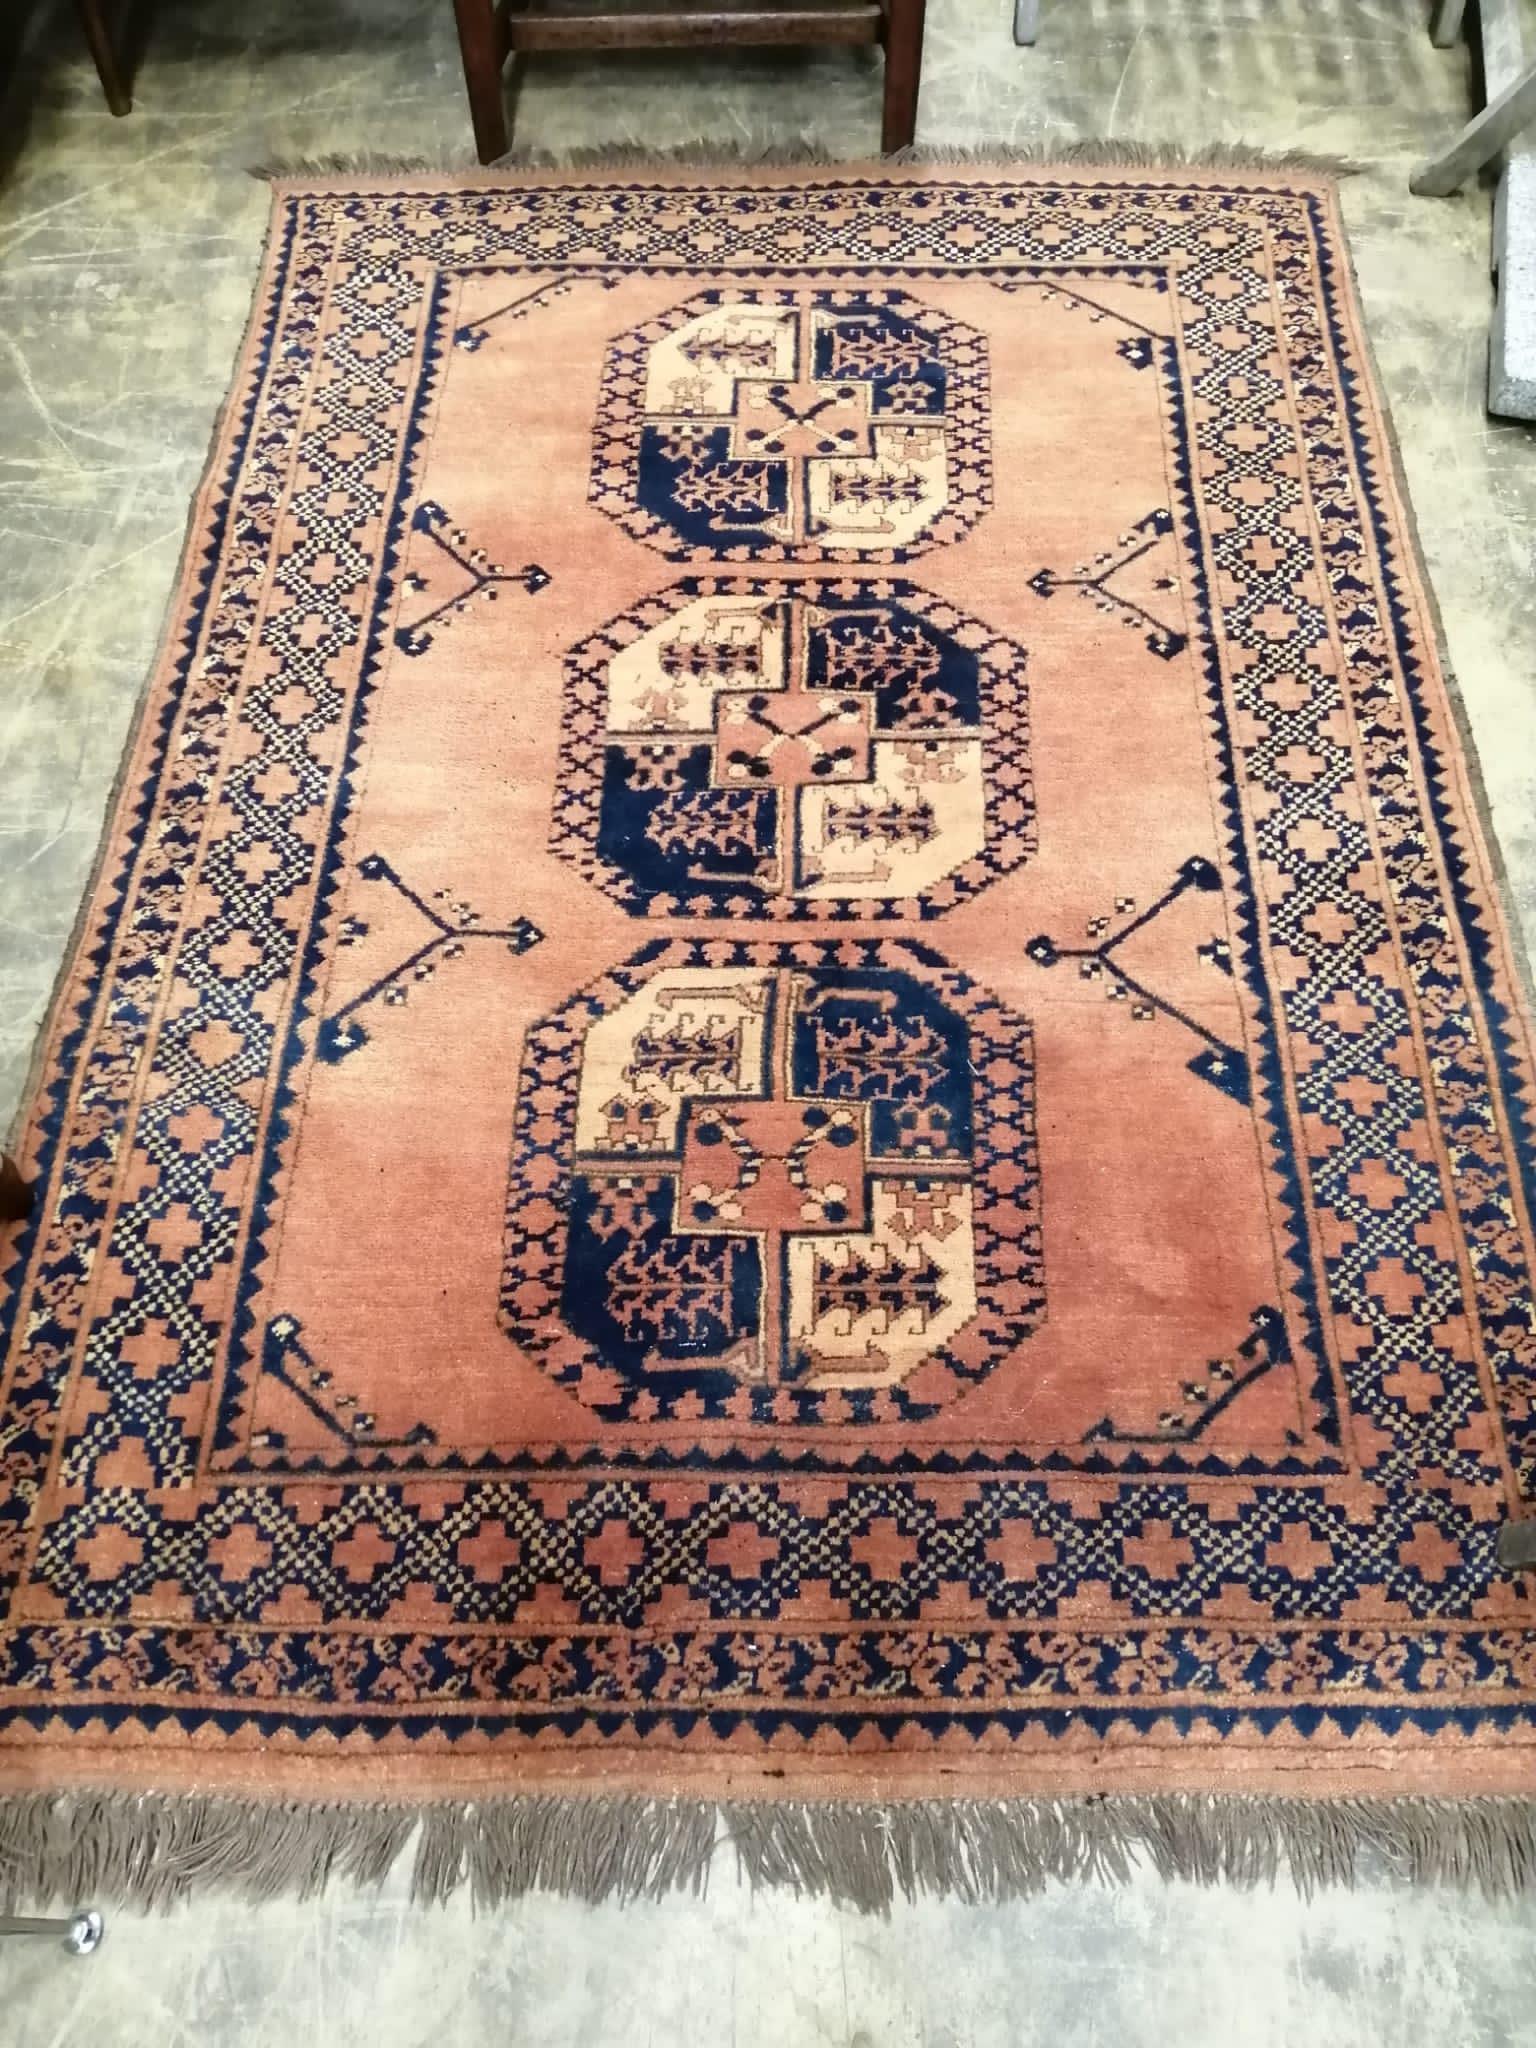 An Afghan red ground rug, woven with three central octagons, 174 x 124cm